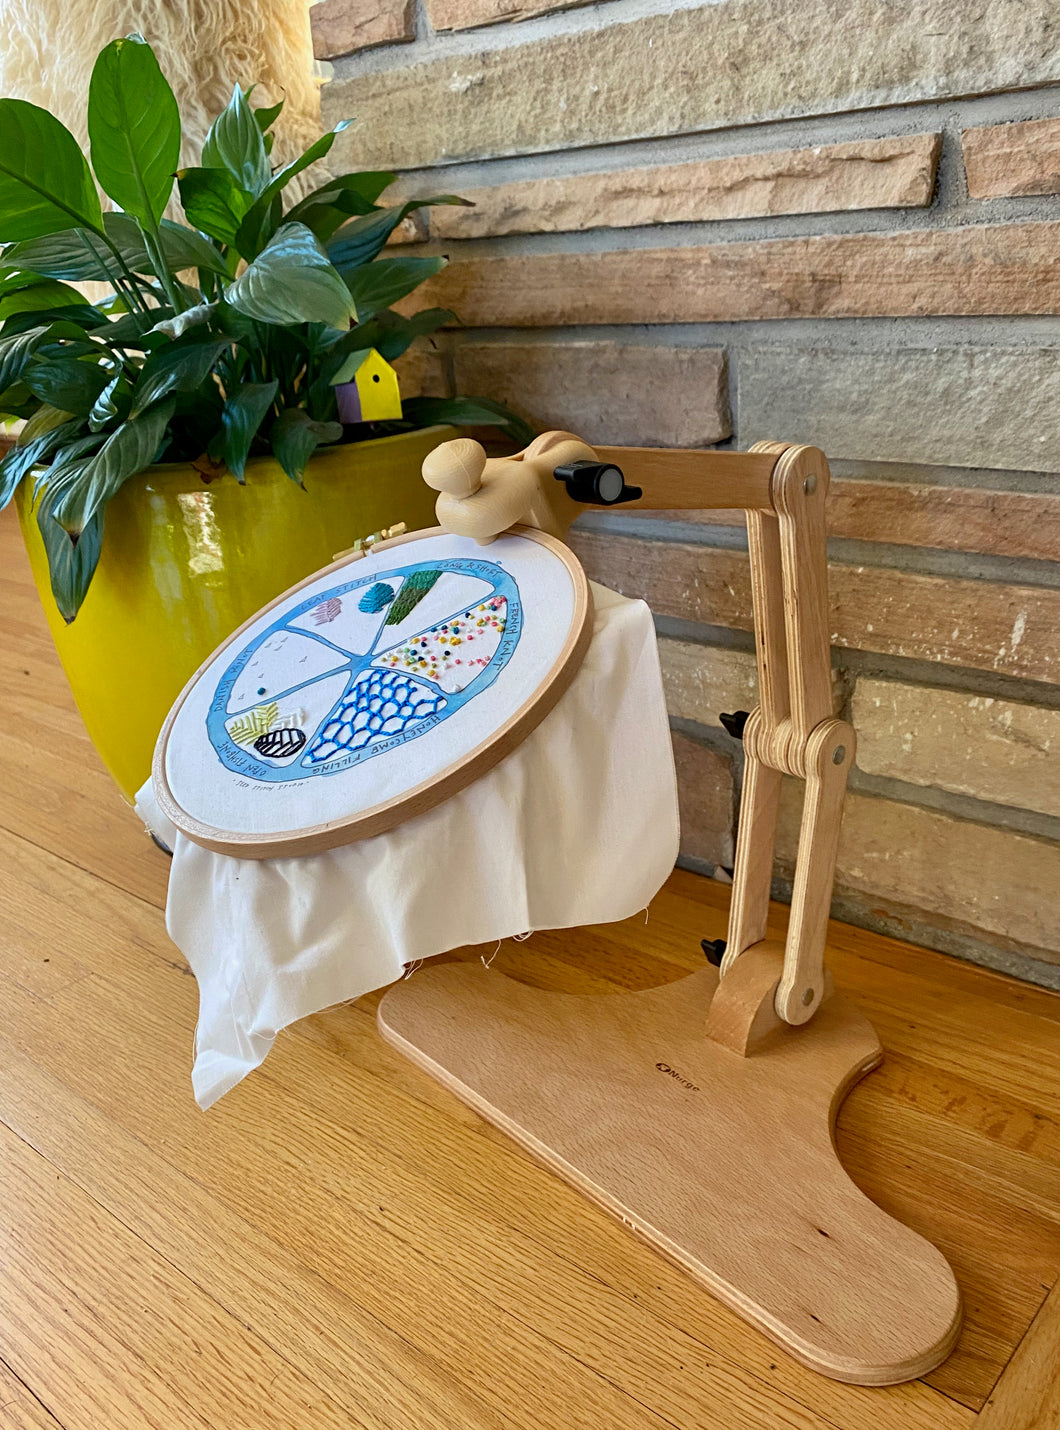 Nurge Wooden Embroidery Hoop Stand, Adjustable Embroidery Table